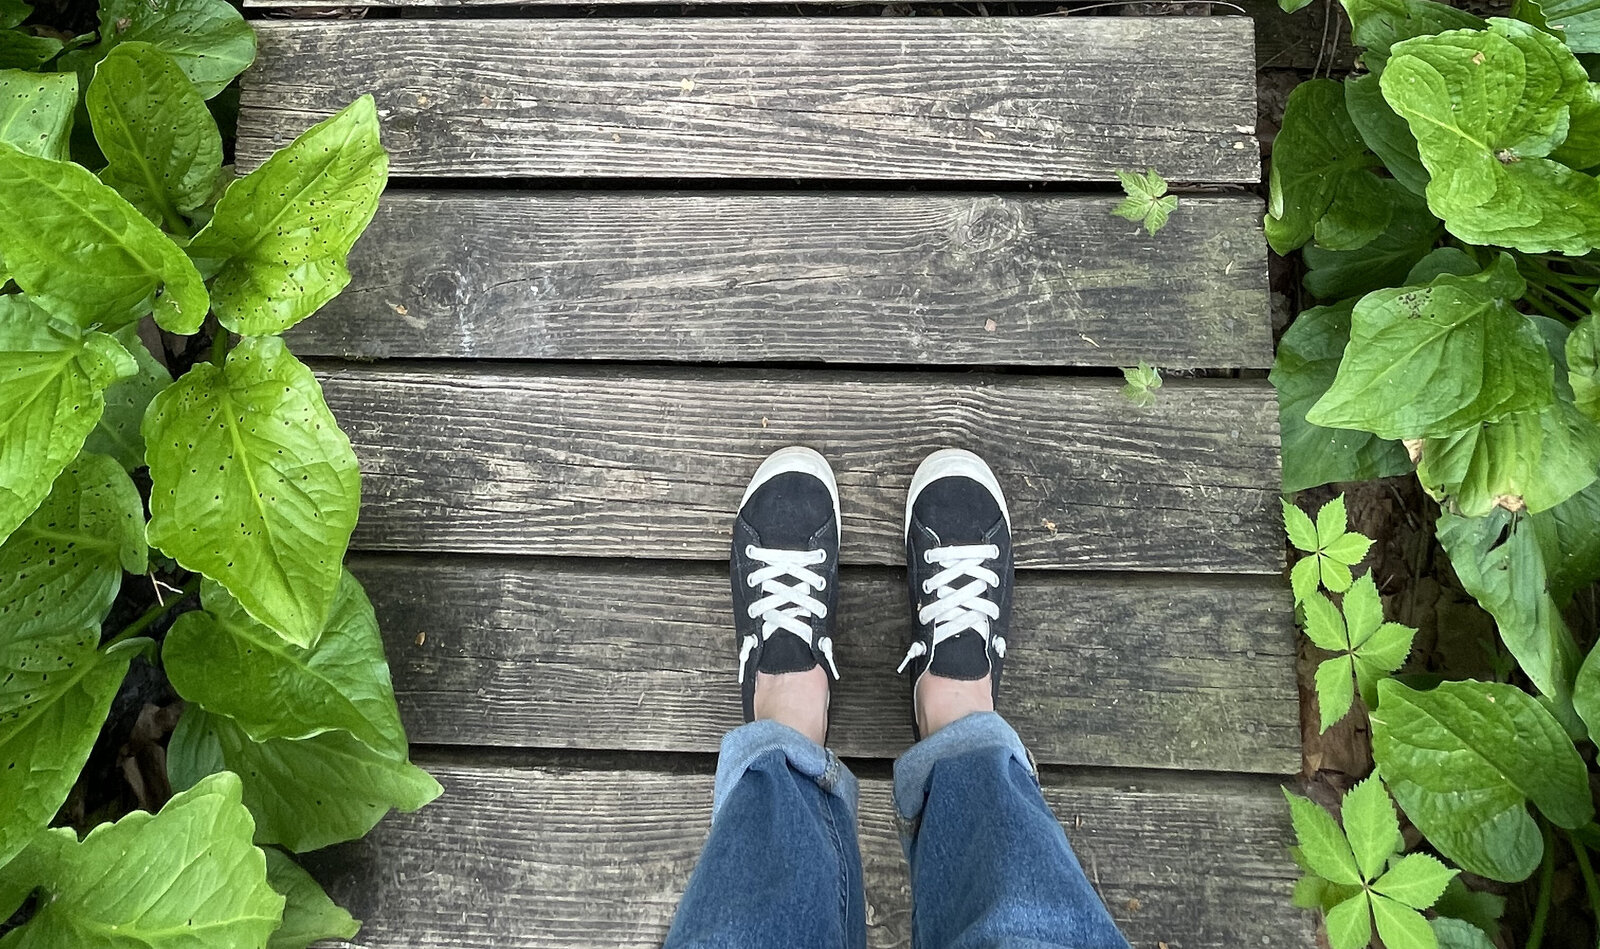 The closeup picture of the shoed feet of Atlas Greene standing on a wooden plank path in the middle of a lush green forest.